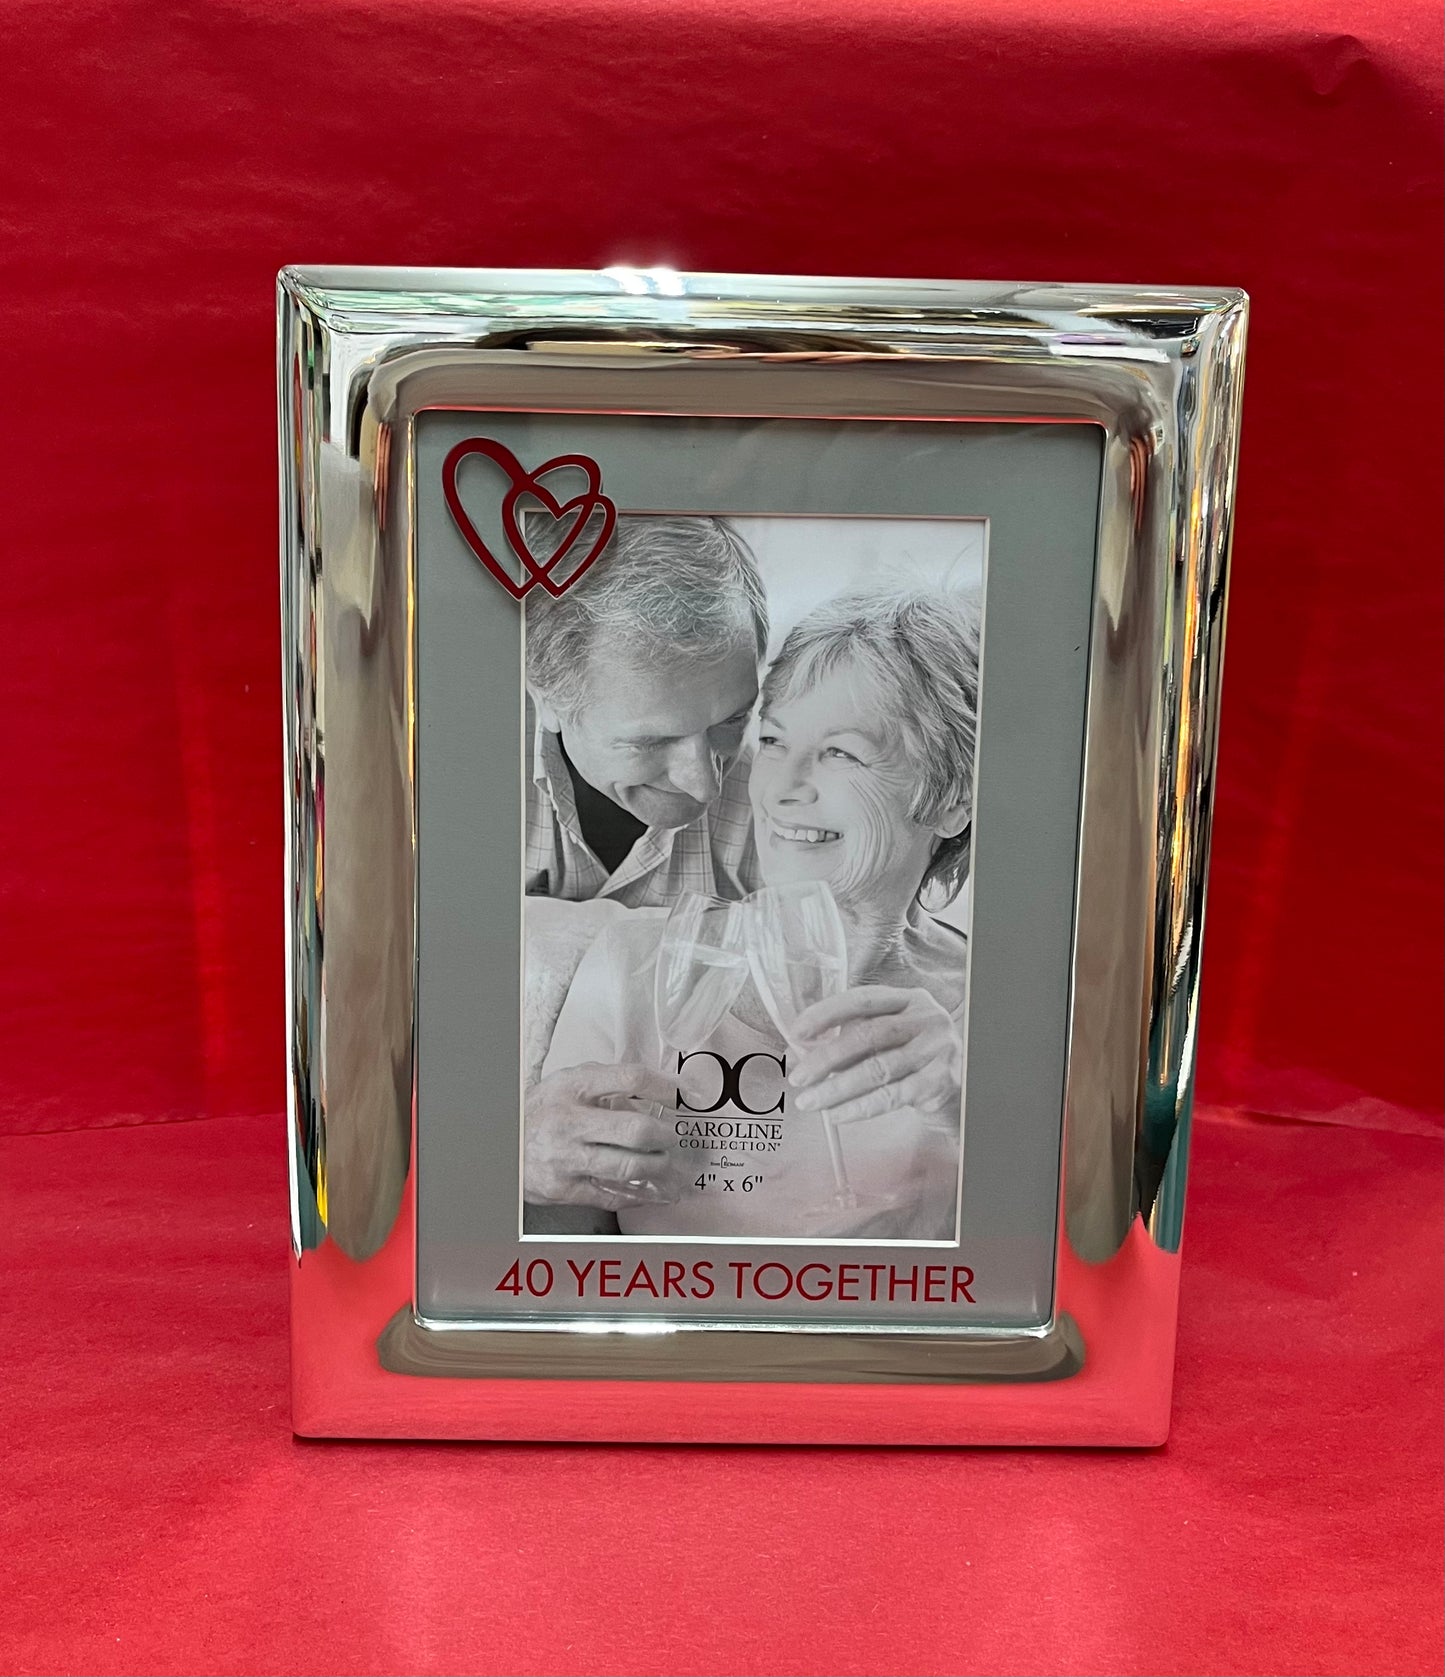 40 years together frame